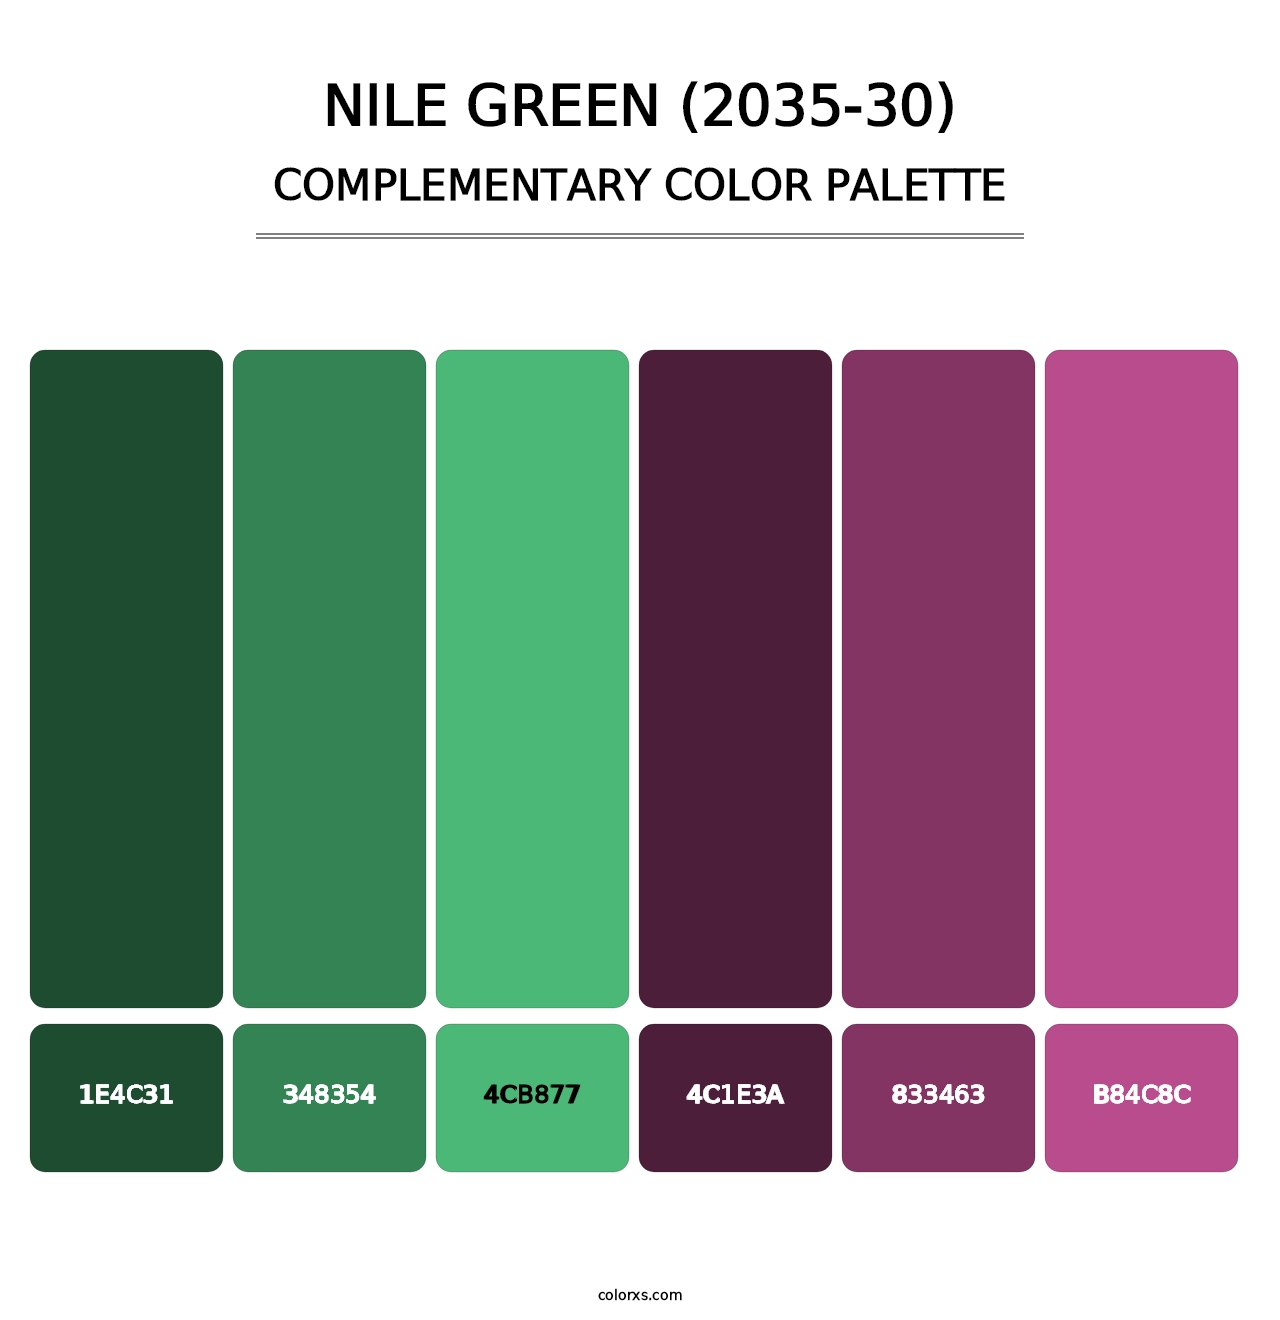 Nile Green (2035-30) - Complementary Color Palette